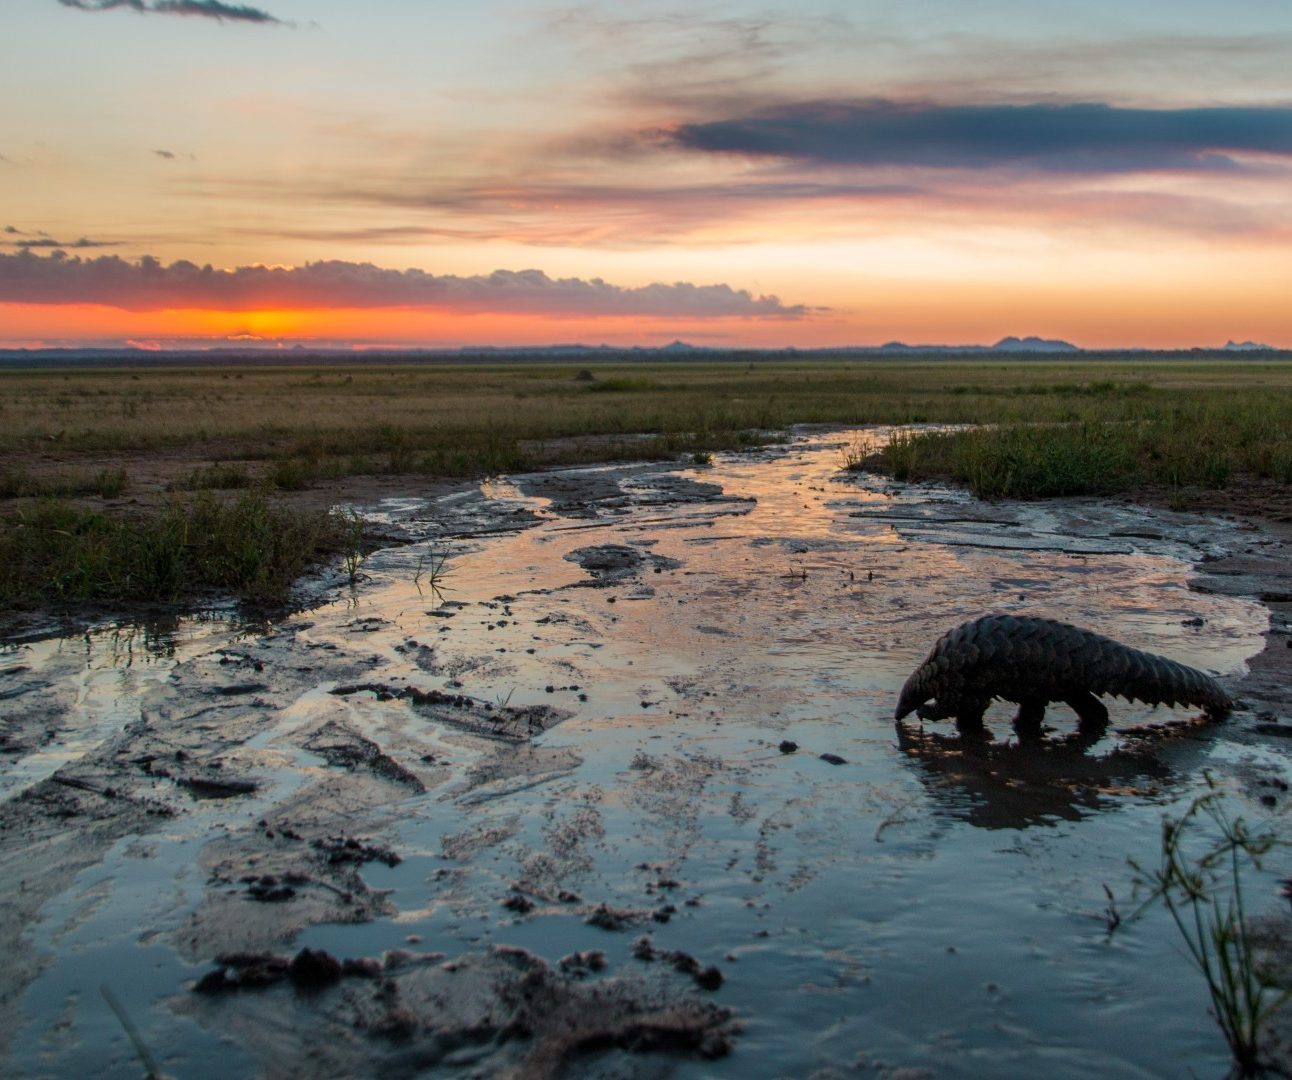 A wild pangolin crossing marshland with a stunning sunset in the background